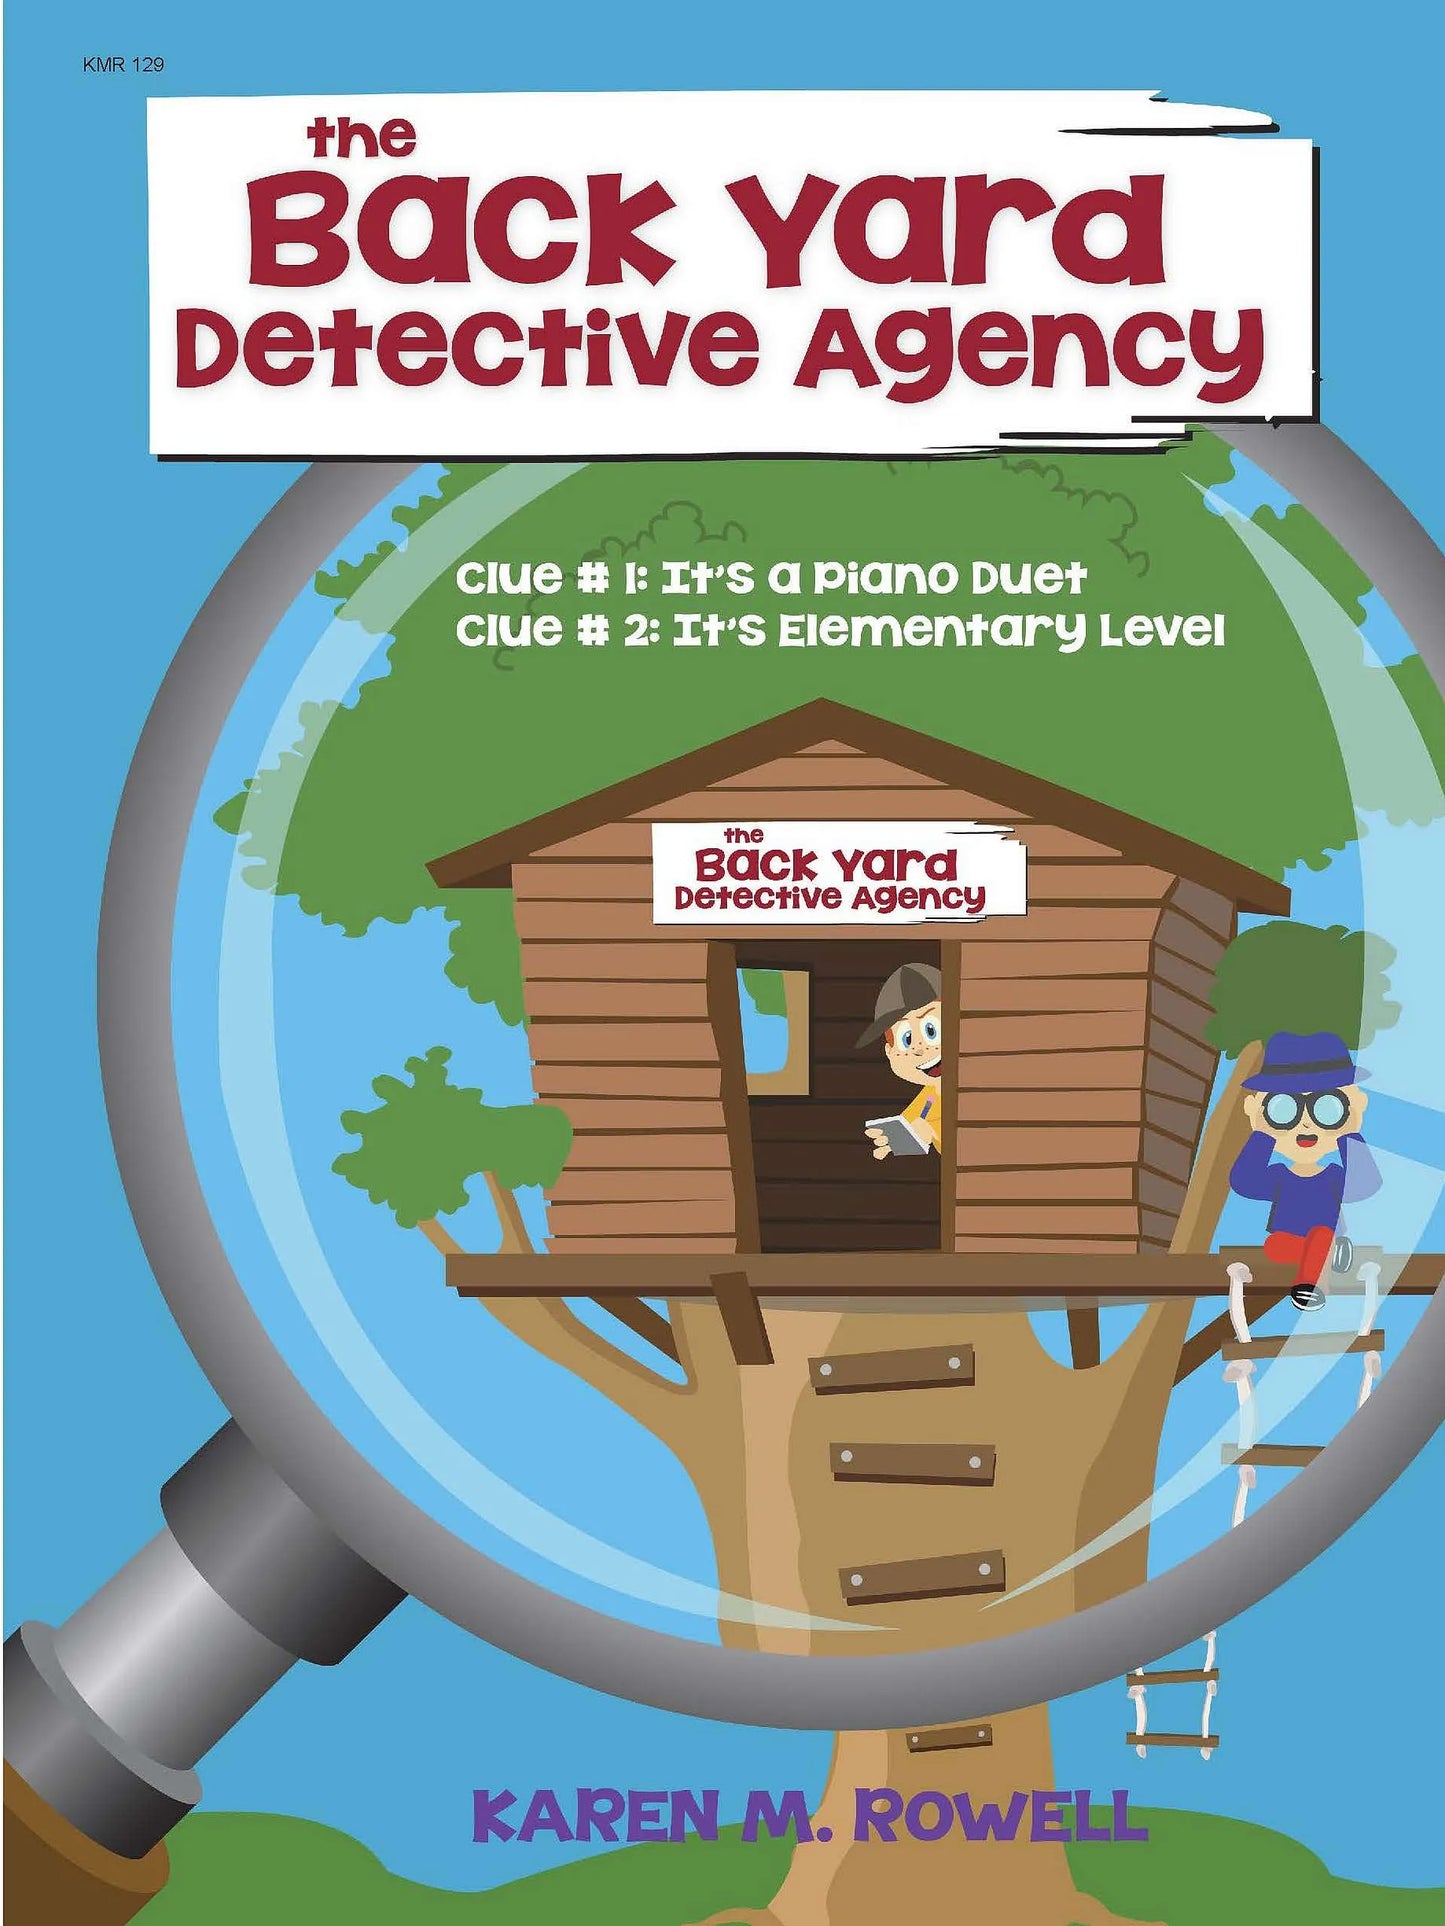 The Back Yard Detective Agency